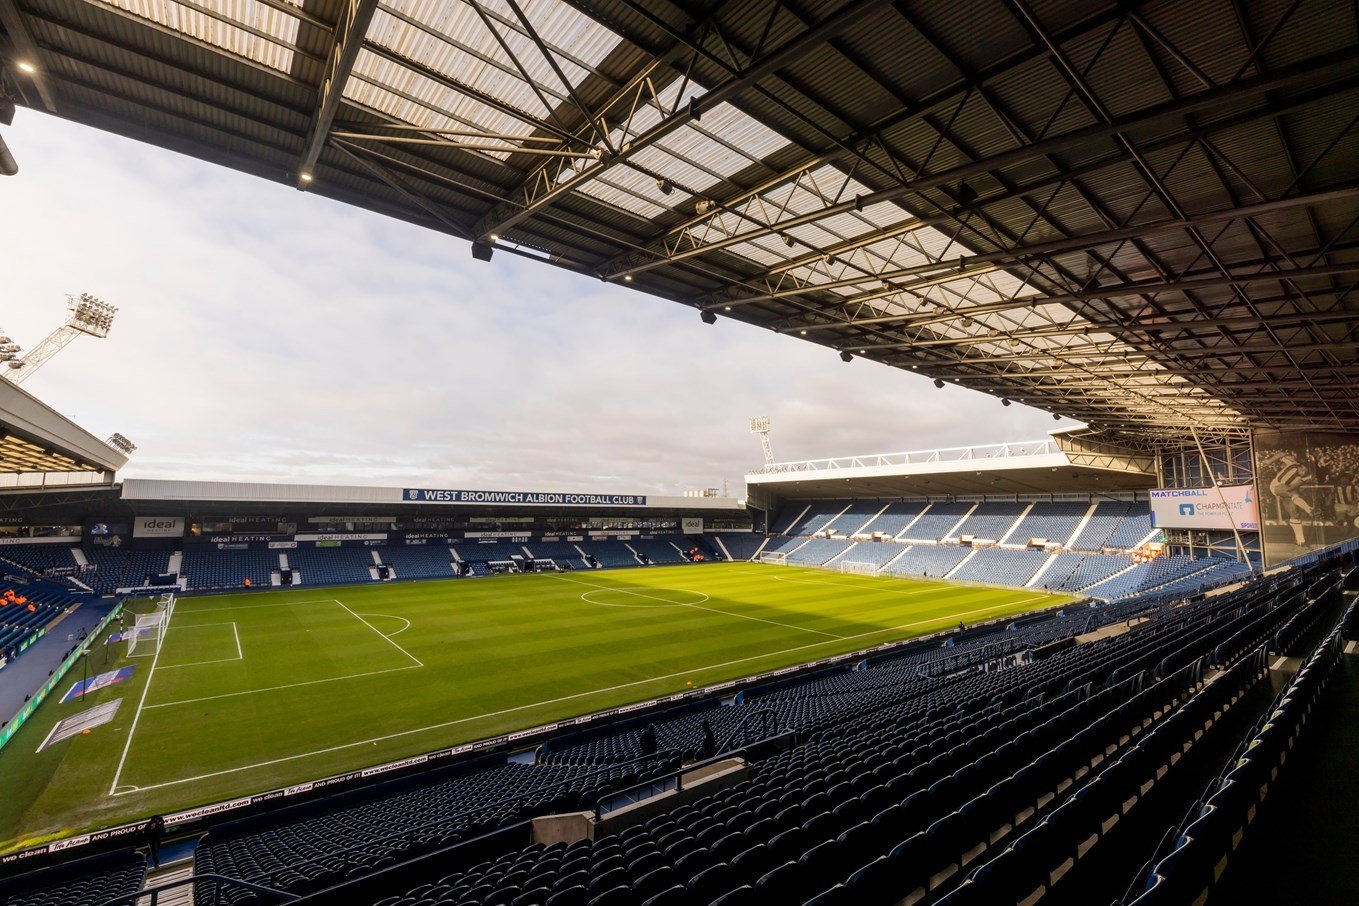 TICKETS: West Bromwich Albion away game sold-out! - News - Coventry City